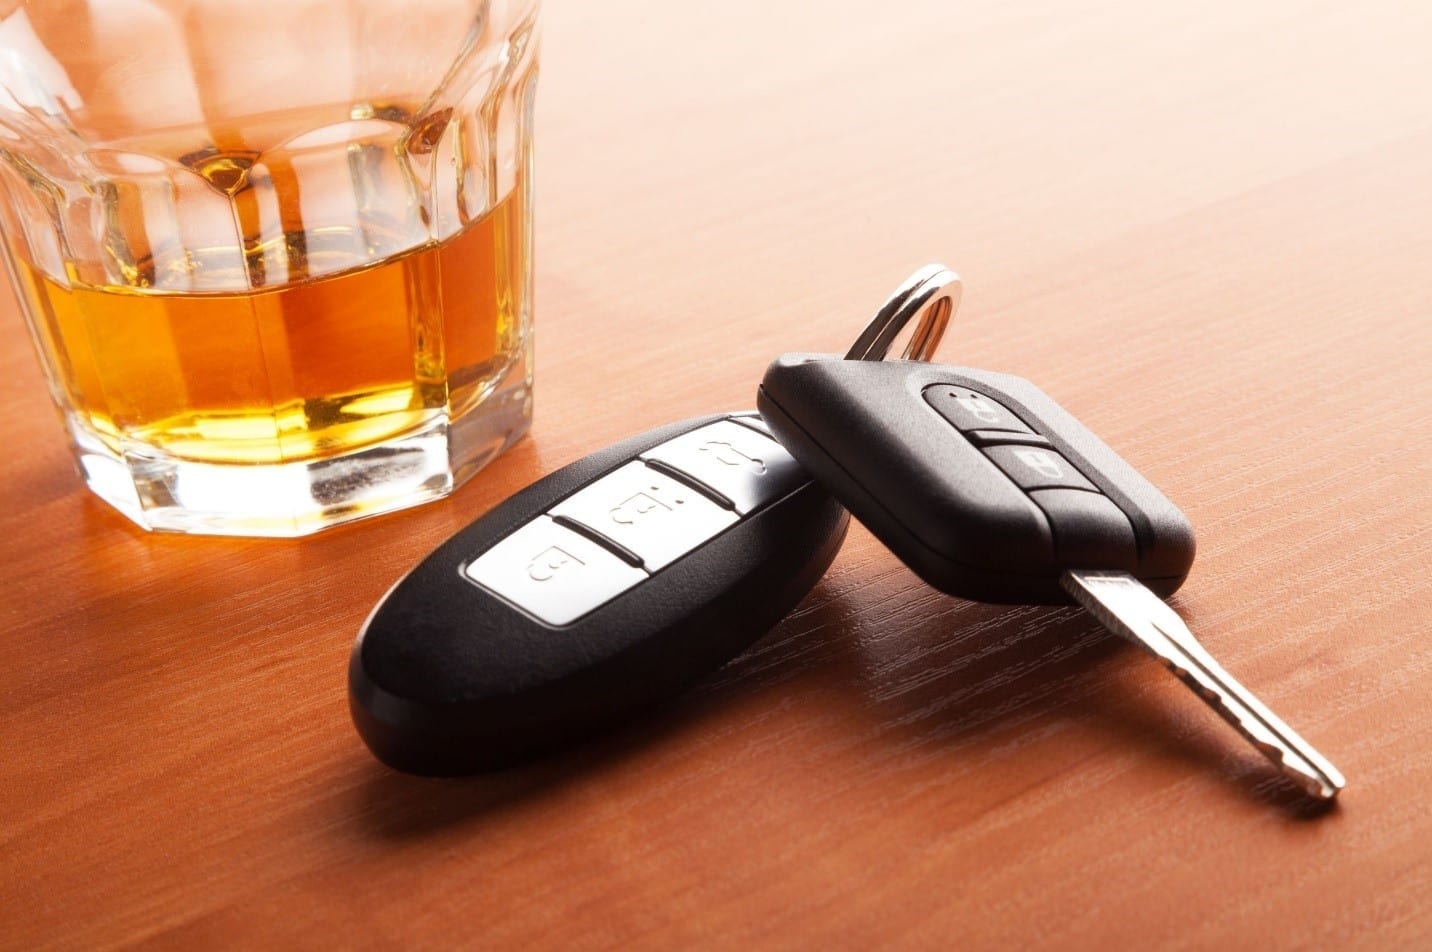 South Florida DUI Accident Lawyer